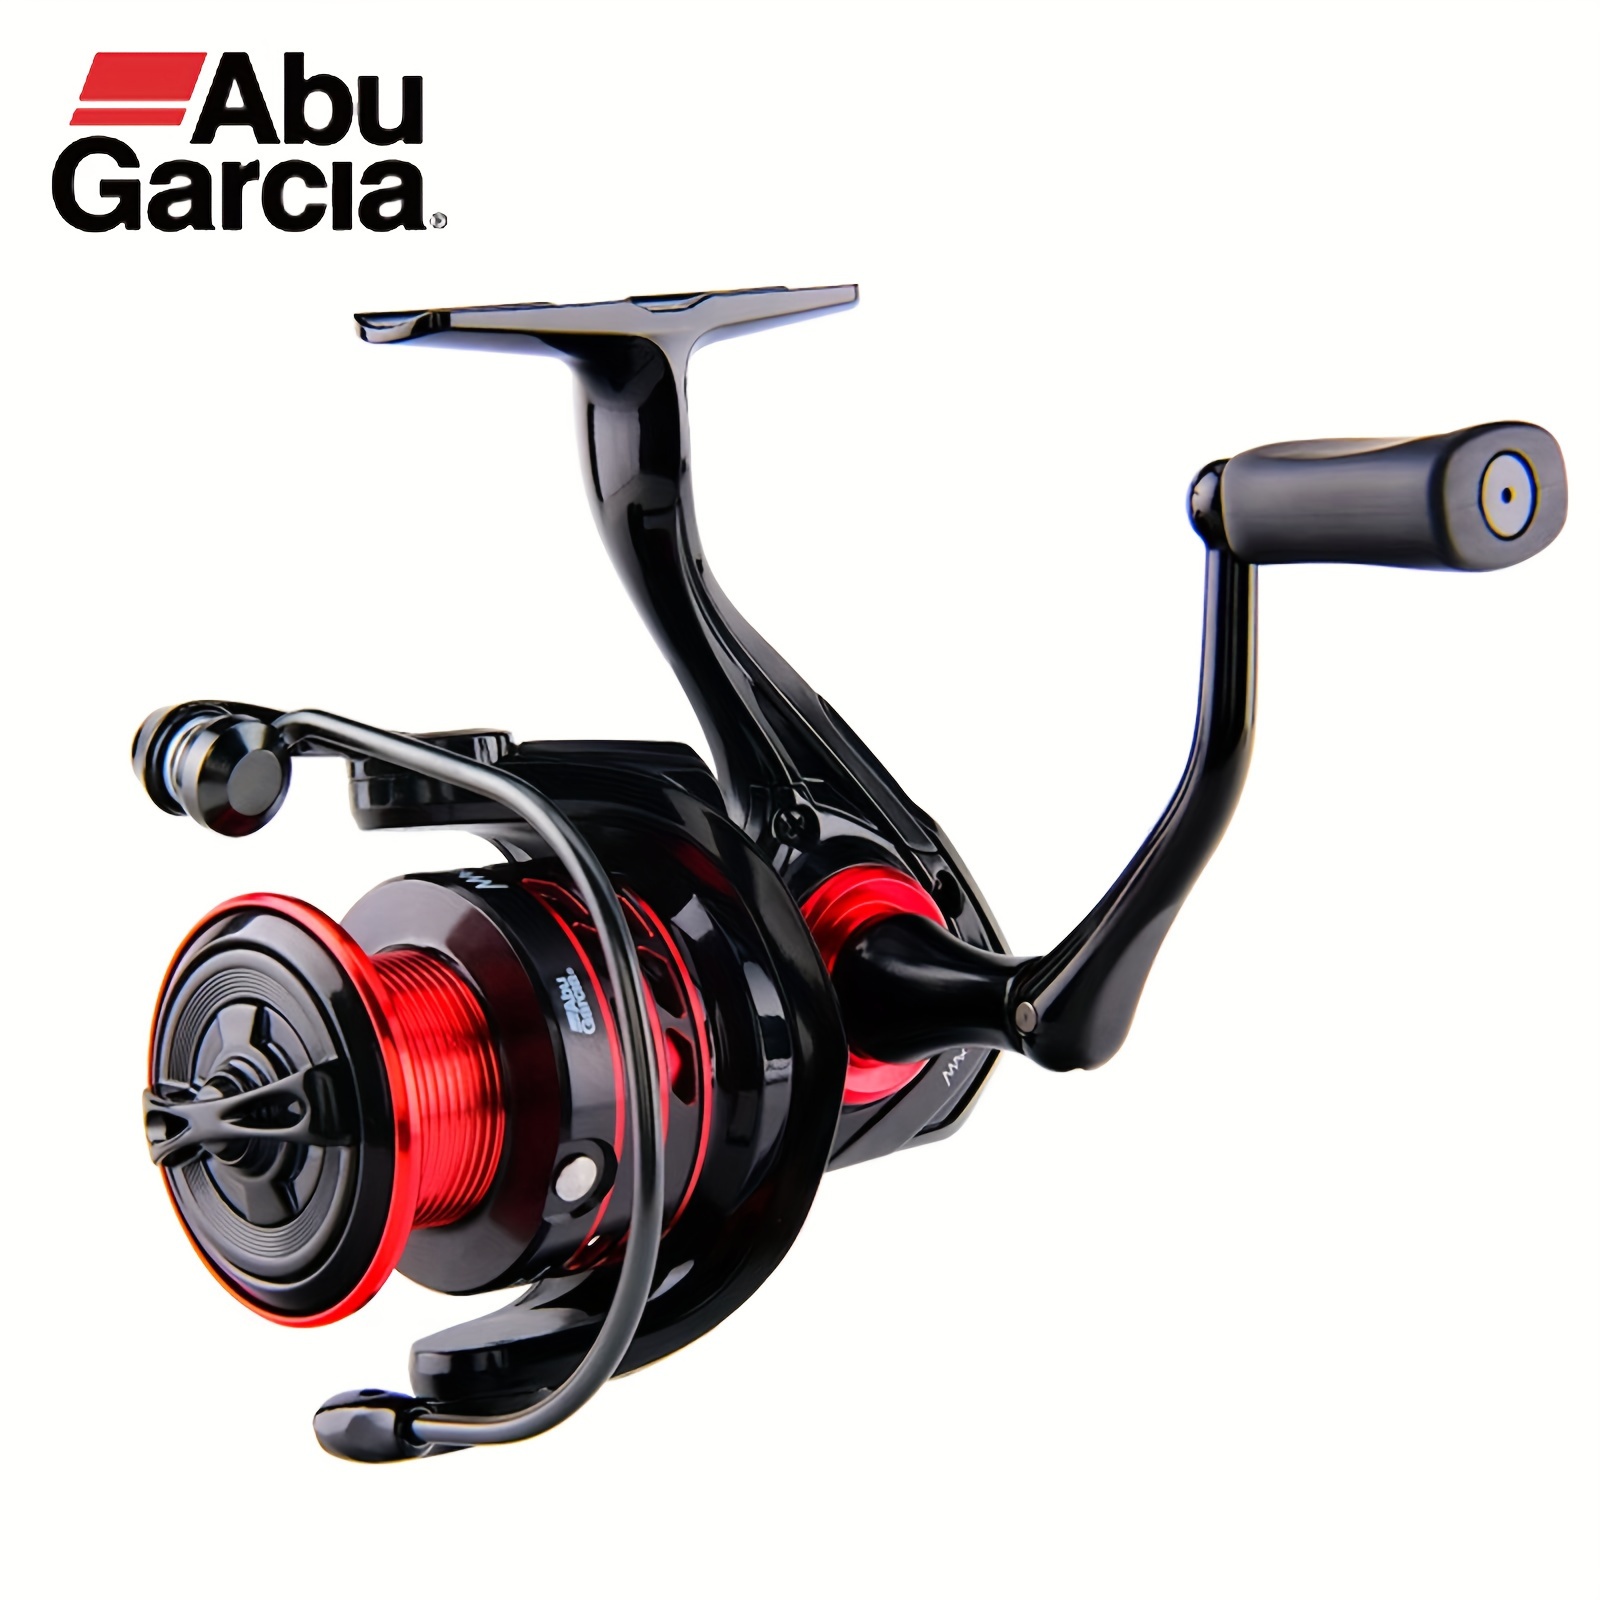 Spinning Fishing Reel 1000,2000 Series Ultralight Max Drag 6kg 5.2:1  Surfcasting Spinning Reel Saltwater Fishing Accessories - AliExpress